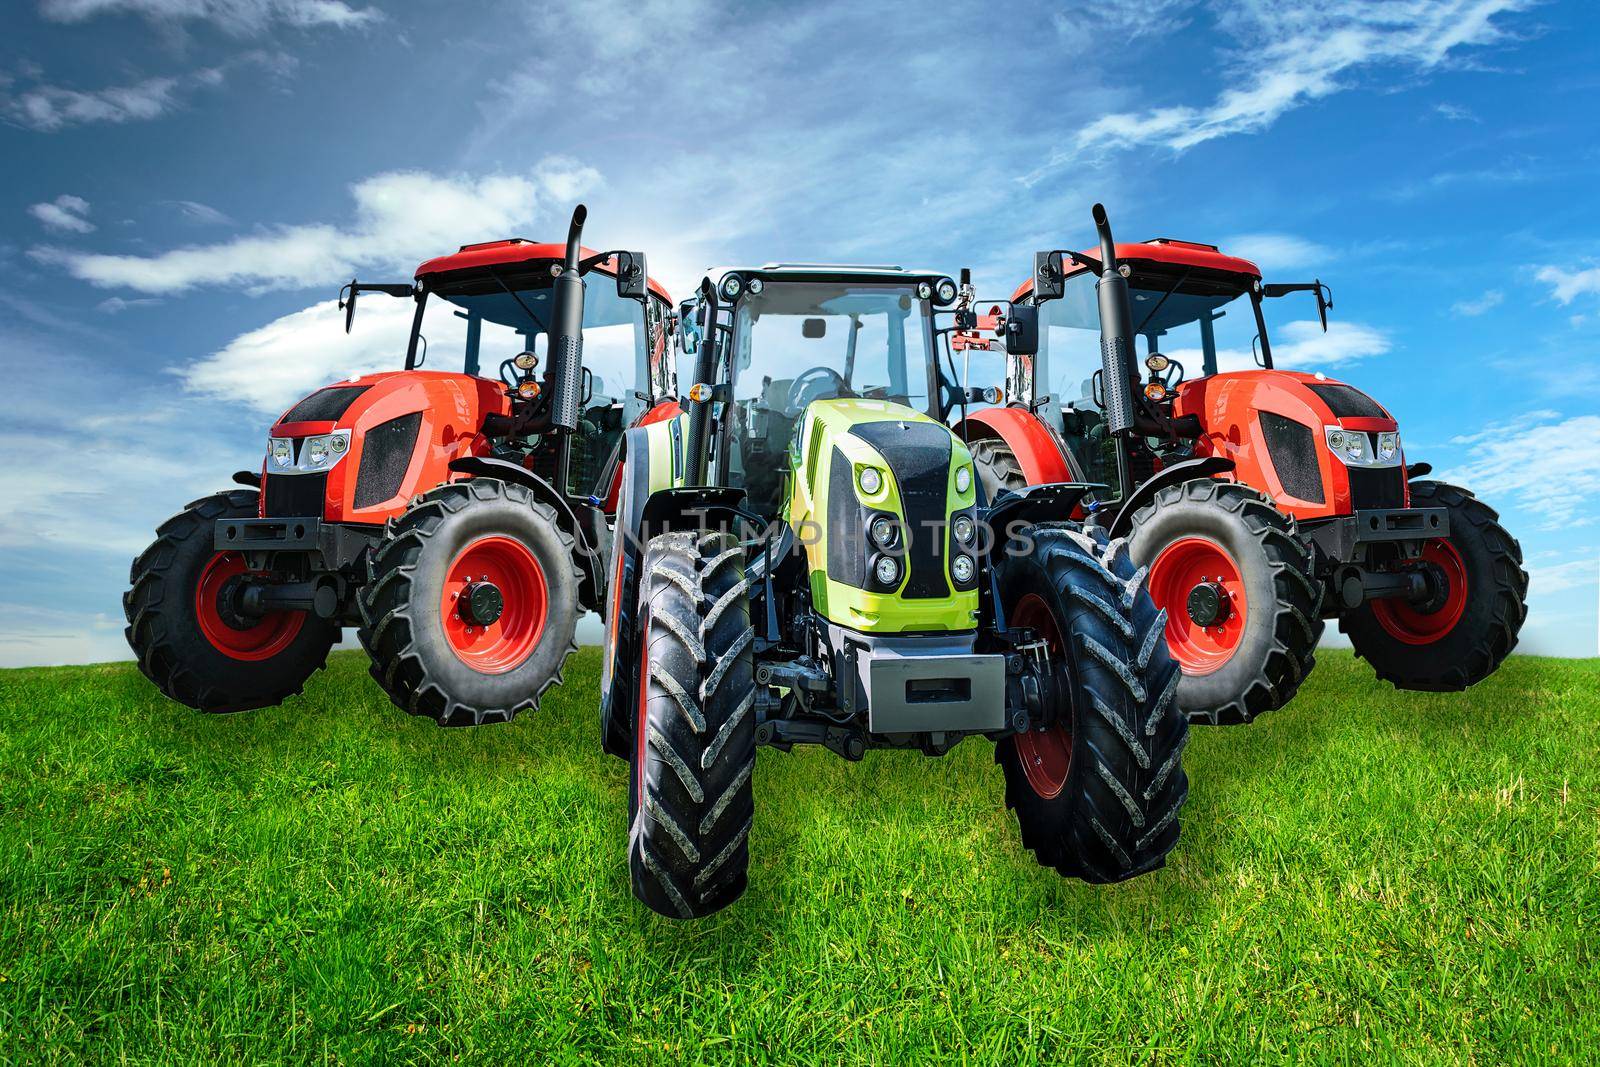 Modern agricultural tractors by wdnet_studio